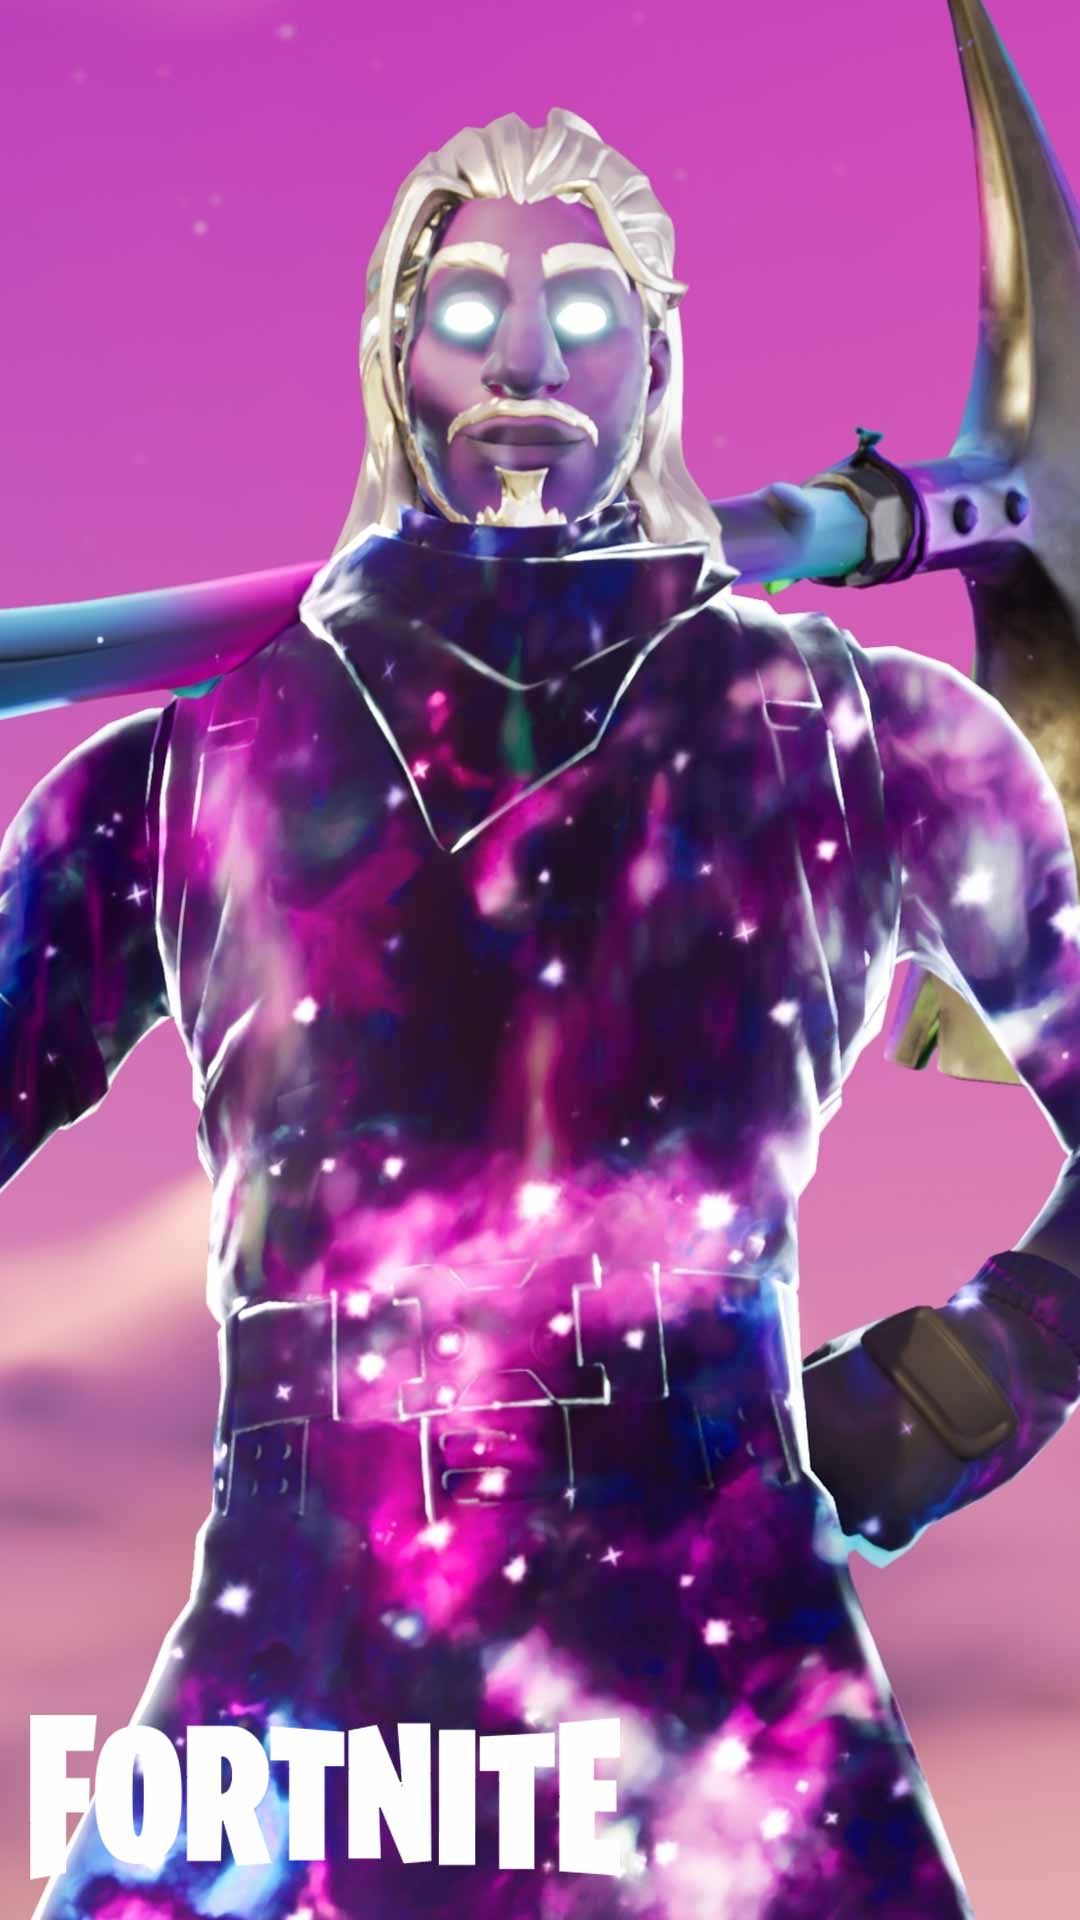 Fortnite wallpaper HD phone background for iPhone android lock screen. Characters Skins art. HD phone background, iPhone background, Gaming wallpaper